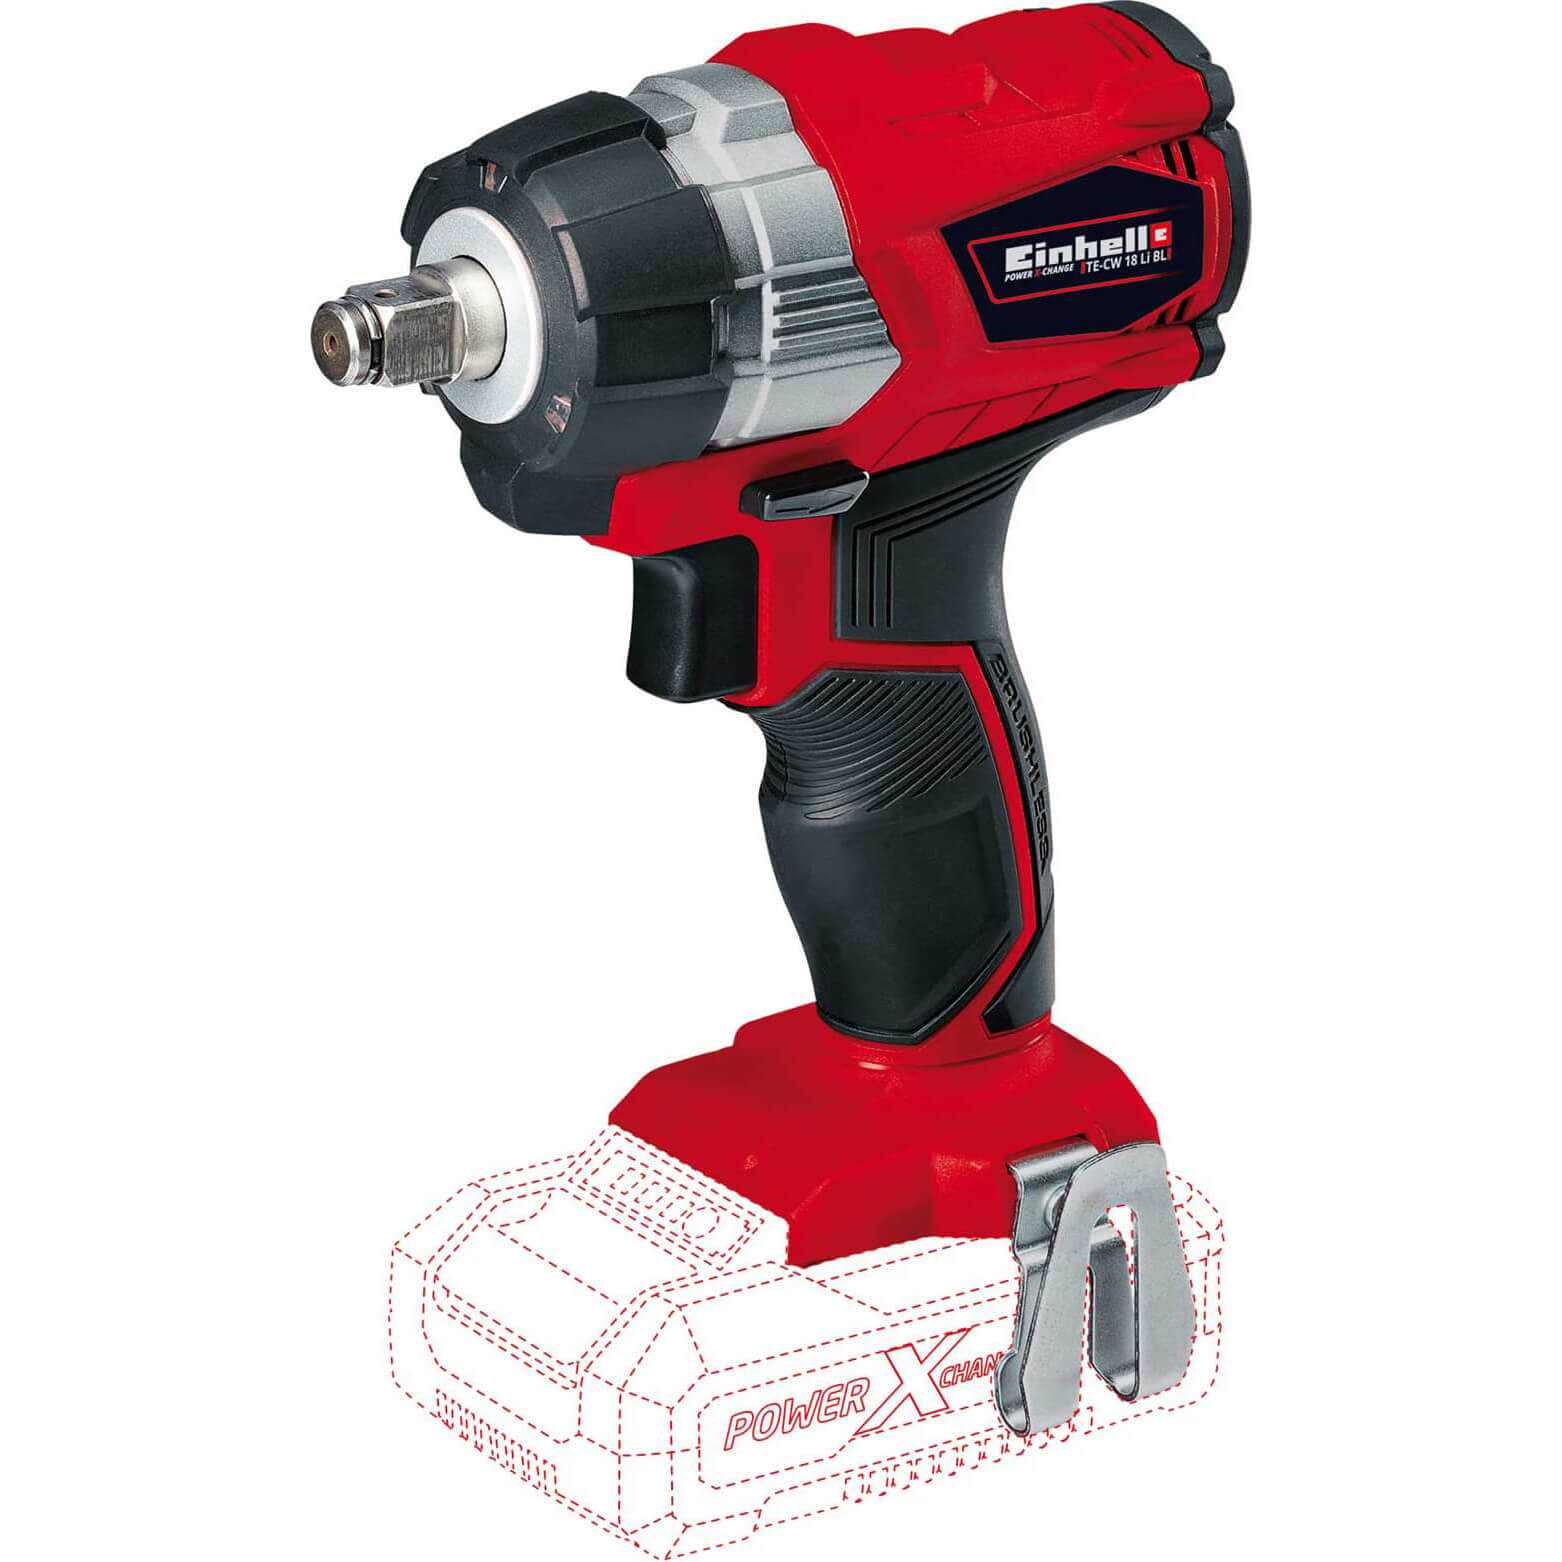 Image of Einhell TE-CW 18 Li BL 18v Cordless Brushless Impact Wrench No Batteries No Charger No Case